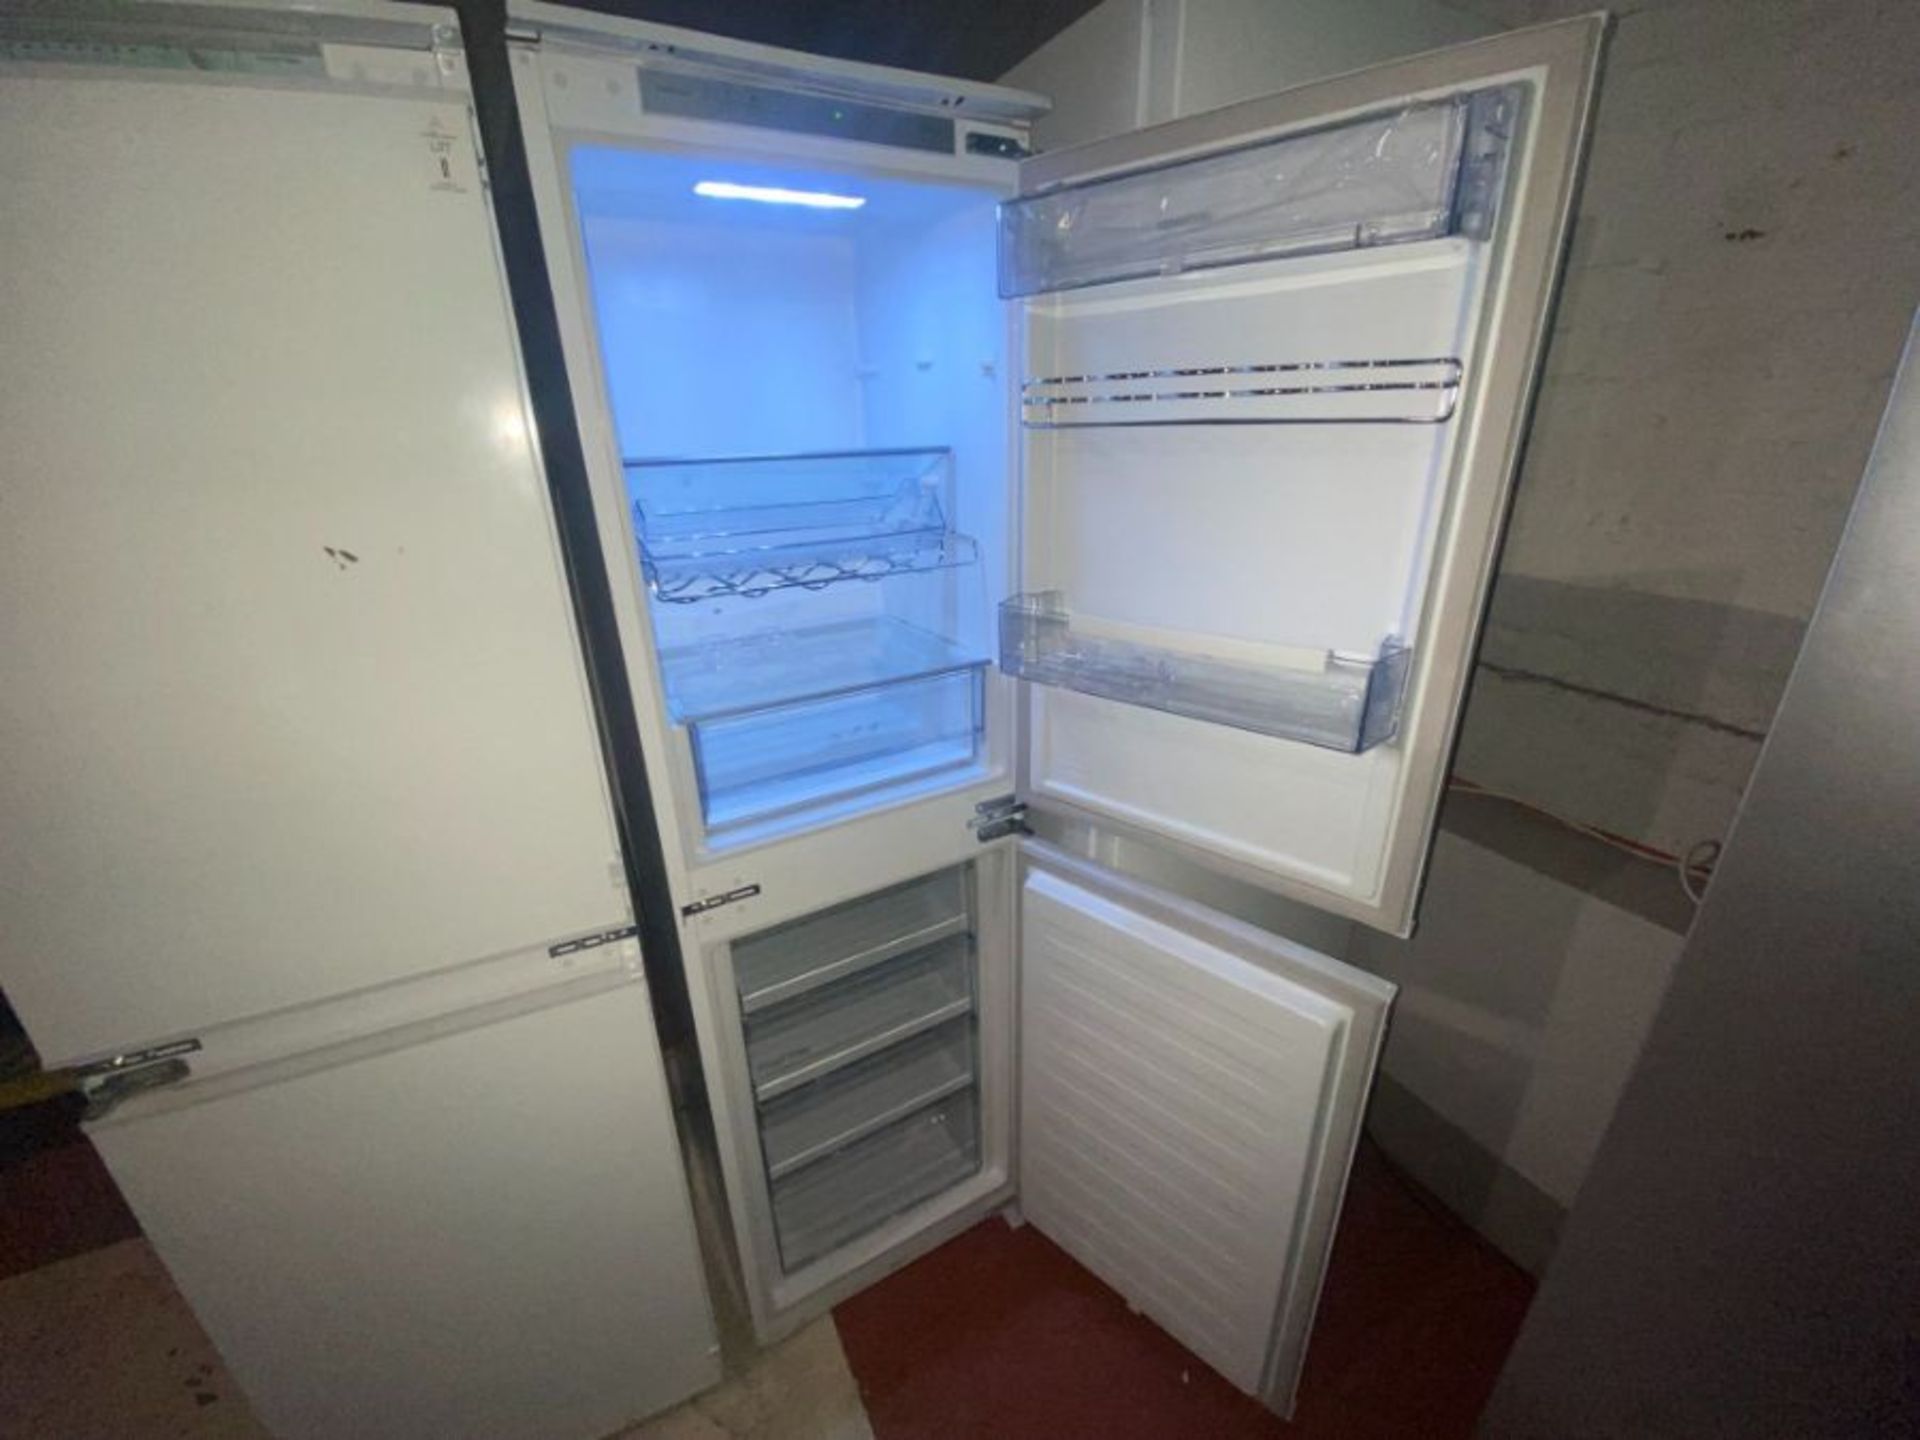 KENWOOD INTEGRATED FROST FREE FRIDGE FREEZER - KIFF5020 (OPENS TO THE RIGHT) - Image 2 of 5